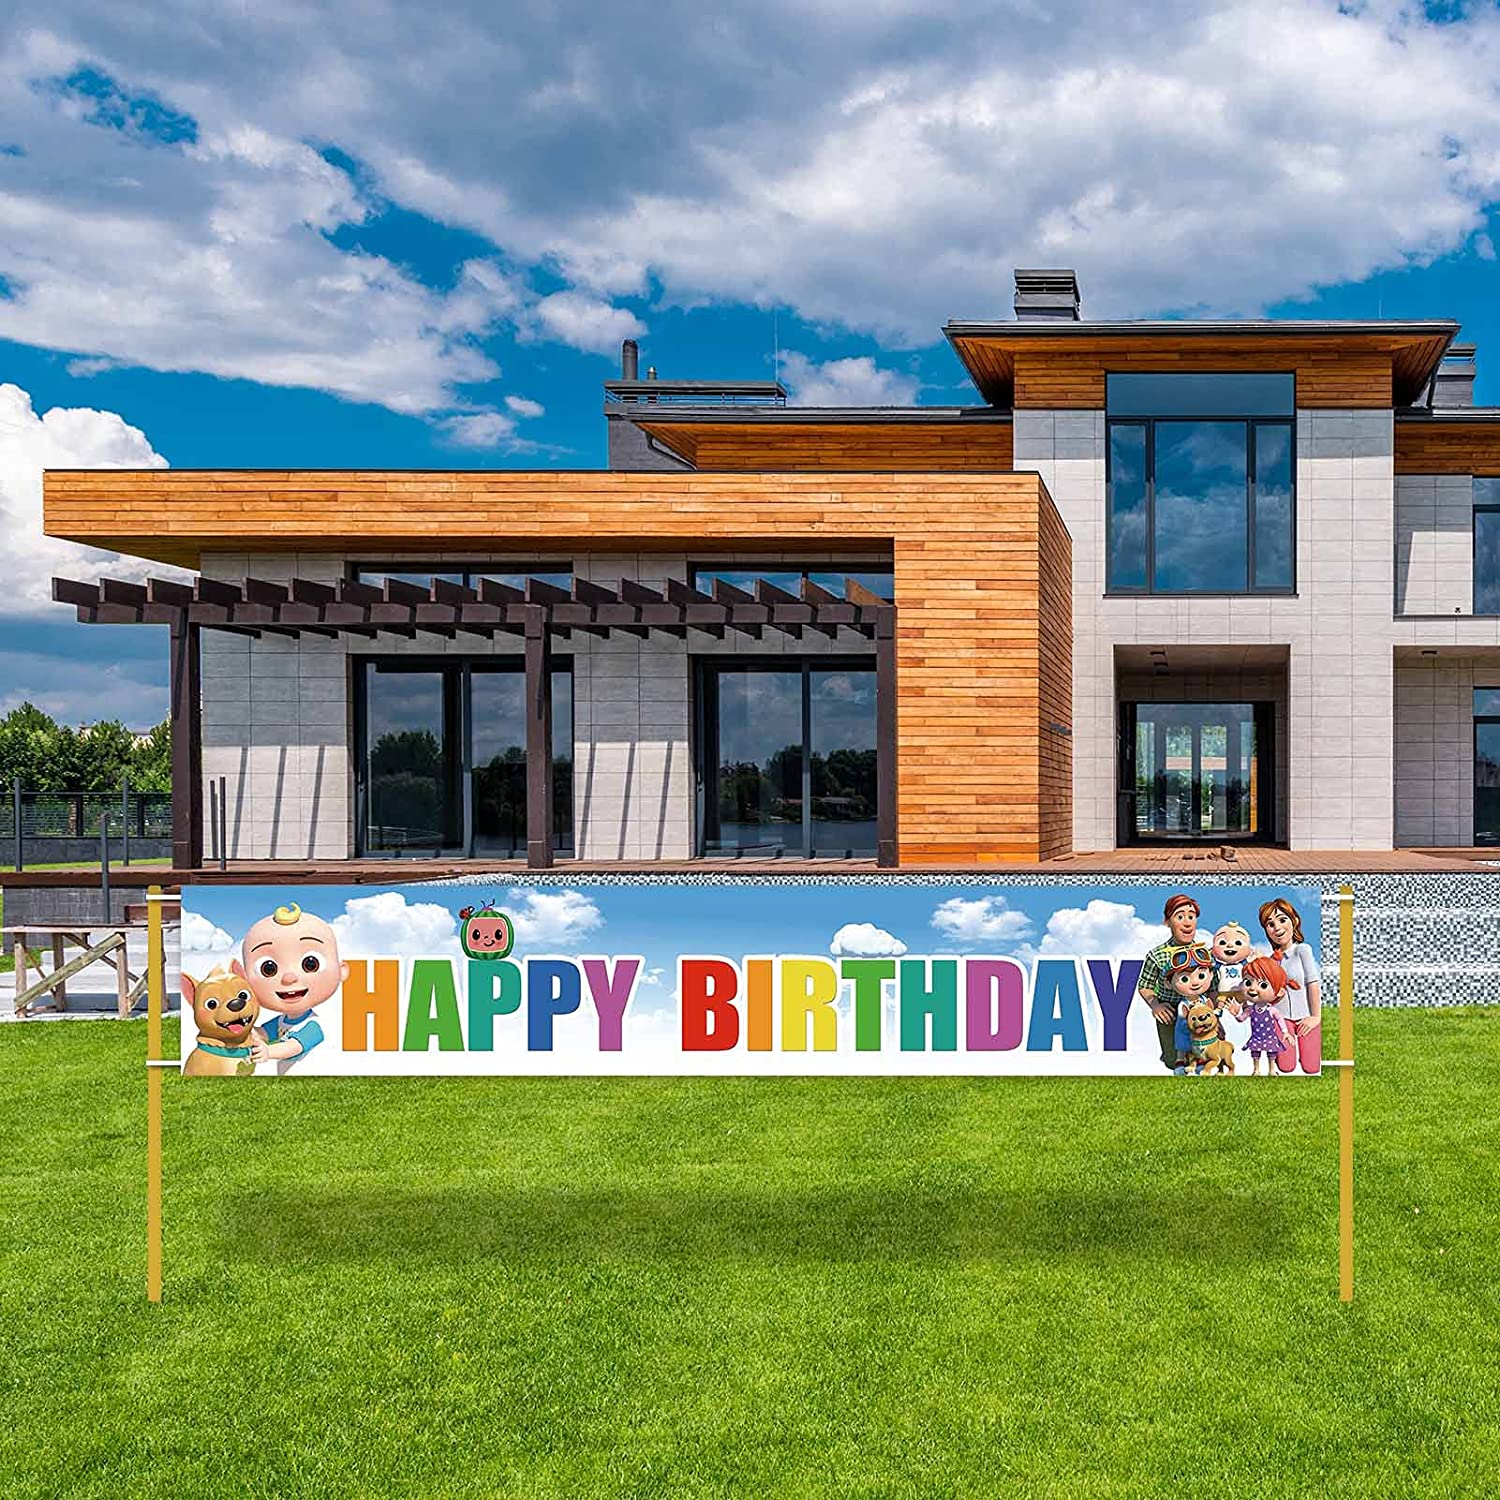 How To Create A Sparkling Happy Birthday Banner For Your Kids